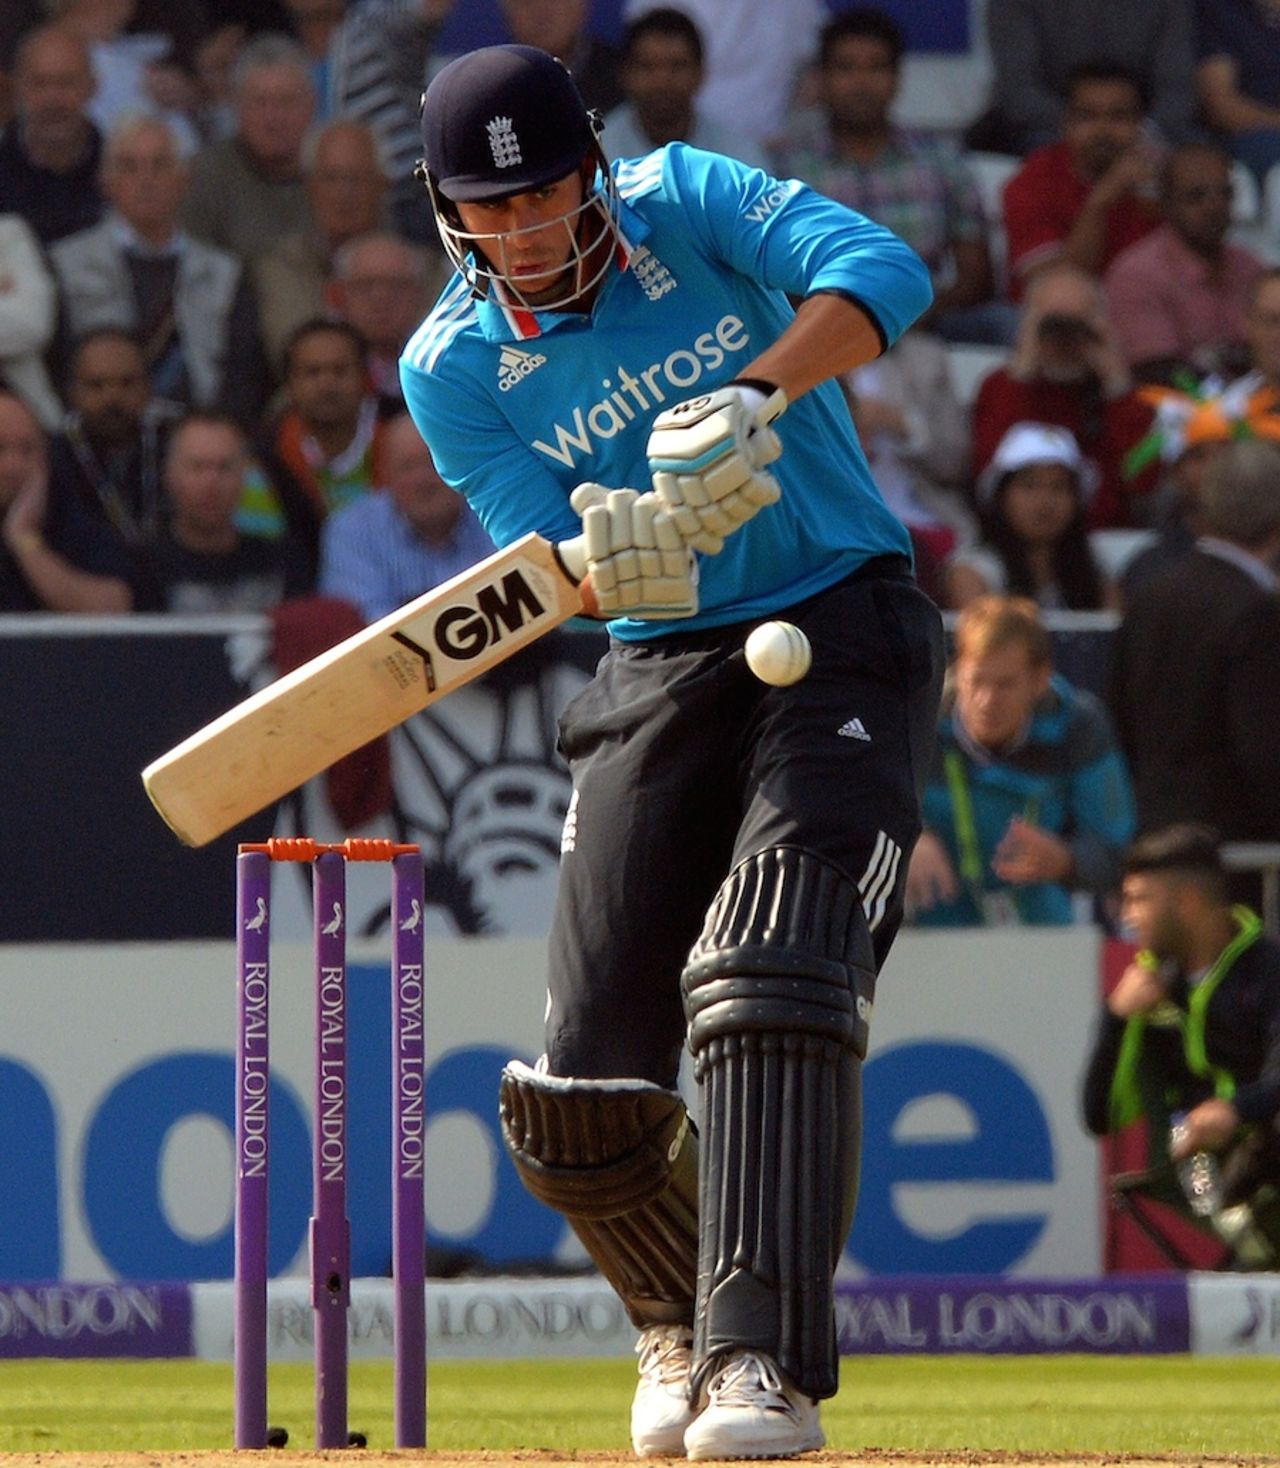 Alex Hales top-edged a pull to be caught at midwicket, England v India, 5th ODI, Headingley, September 5, 2014